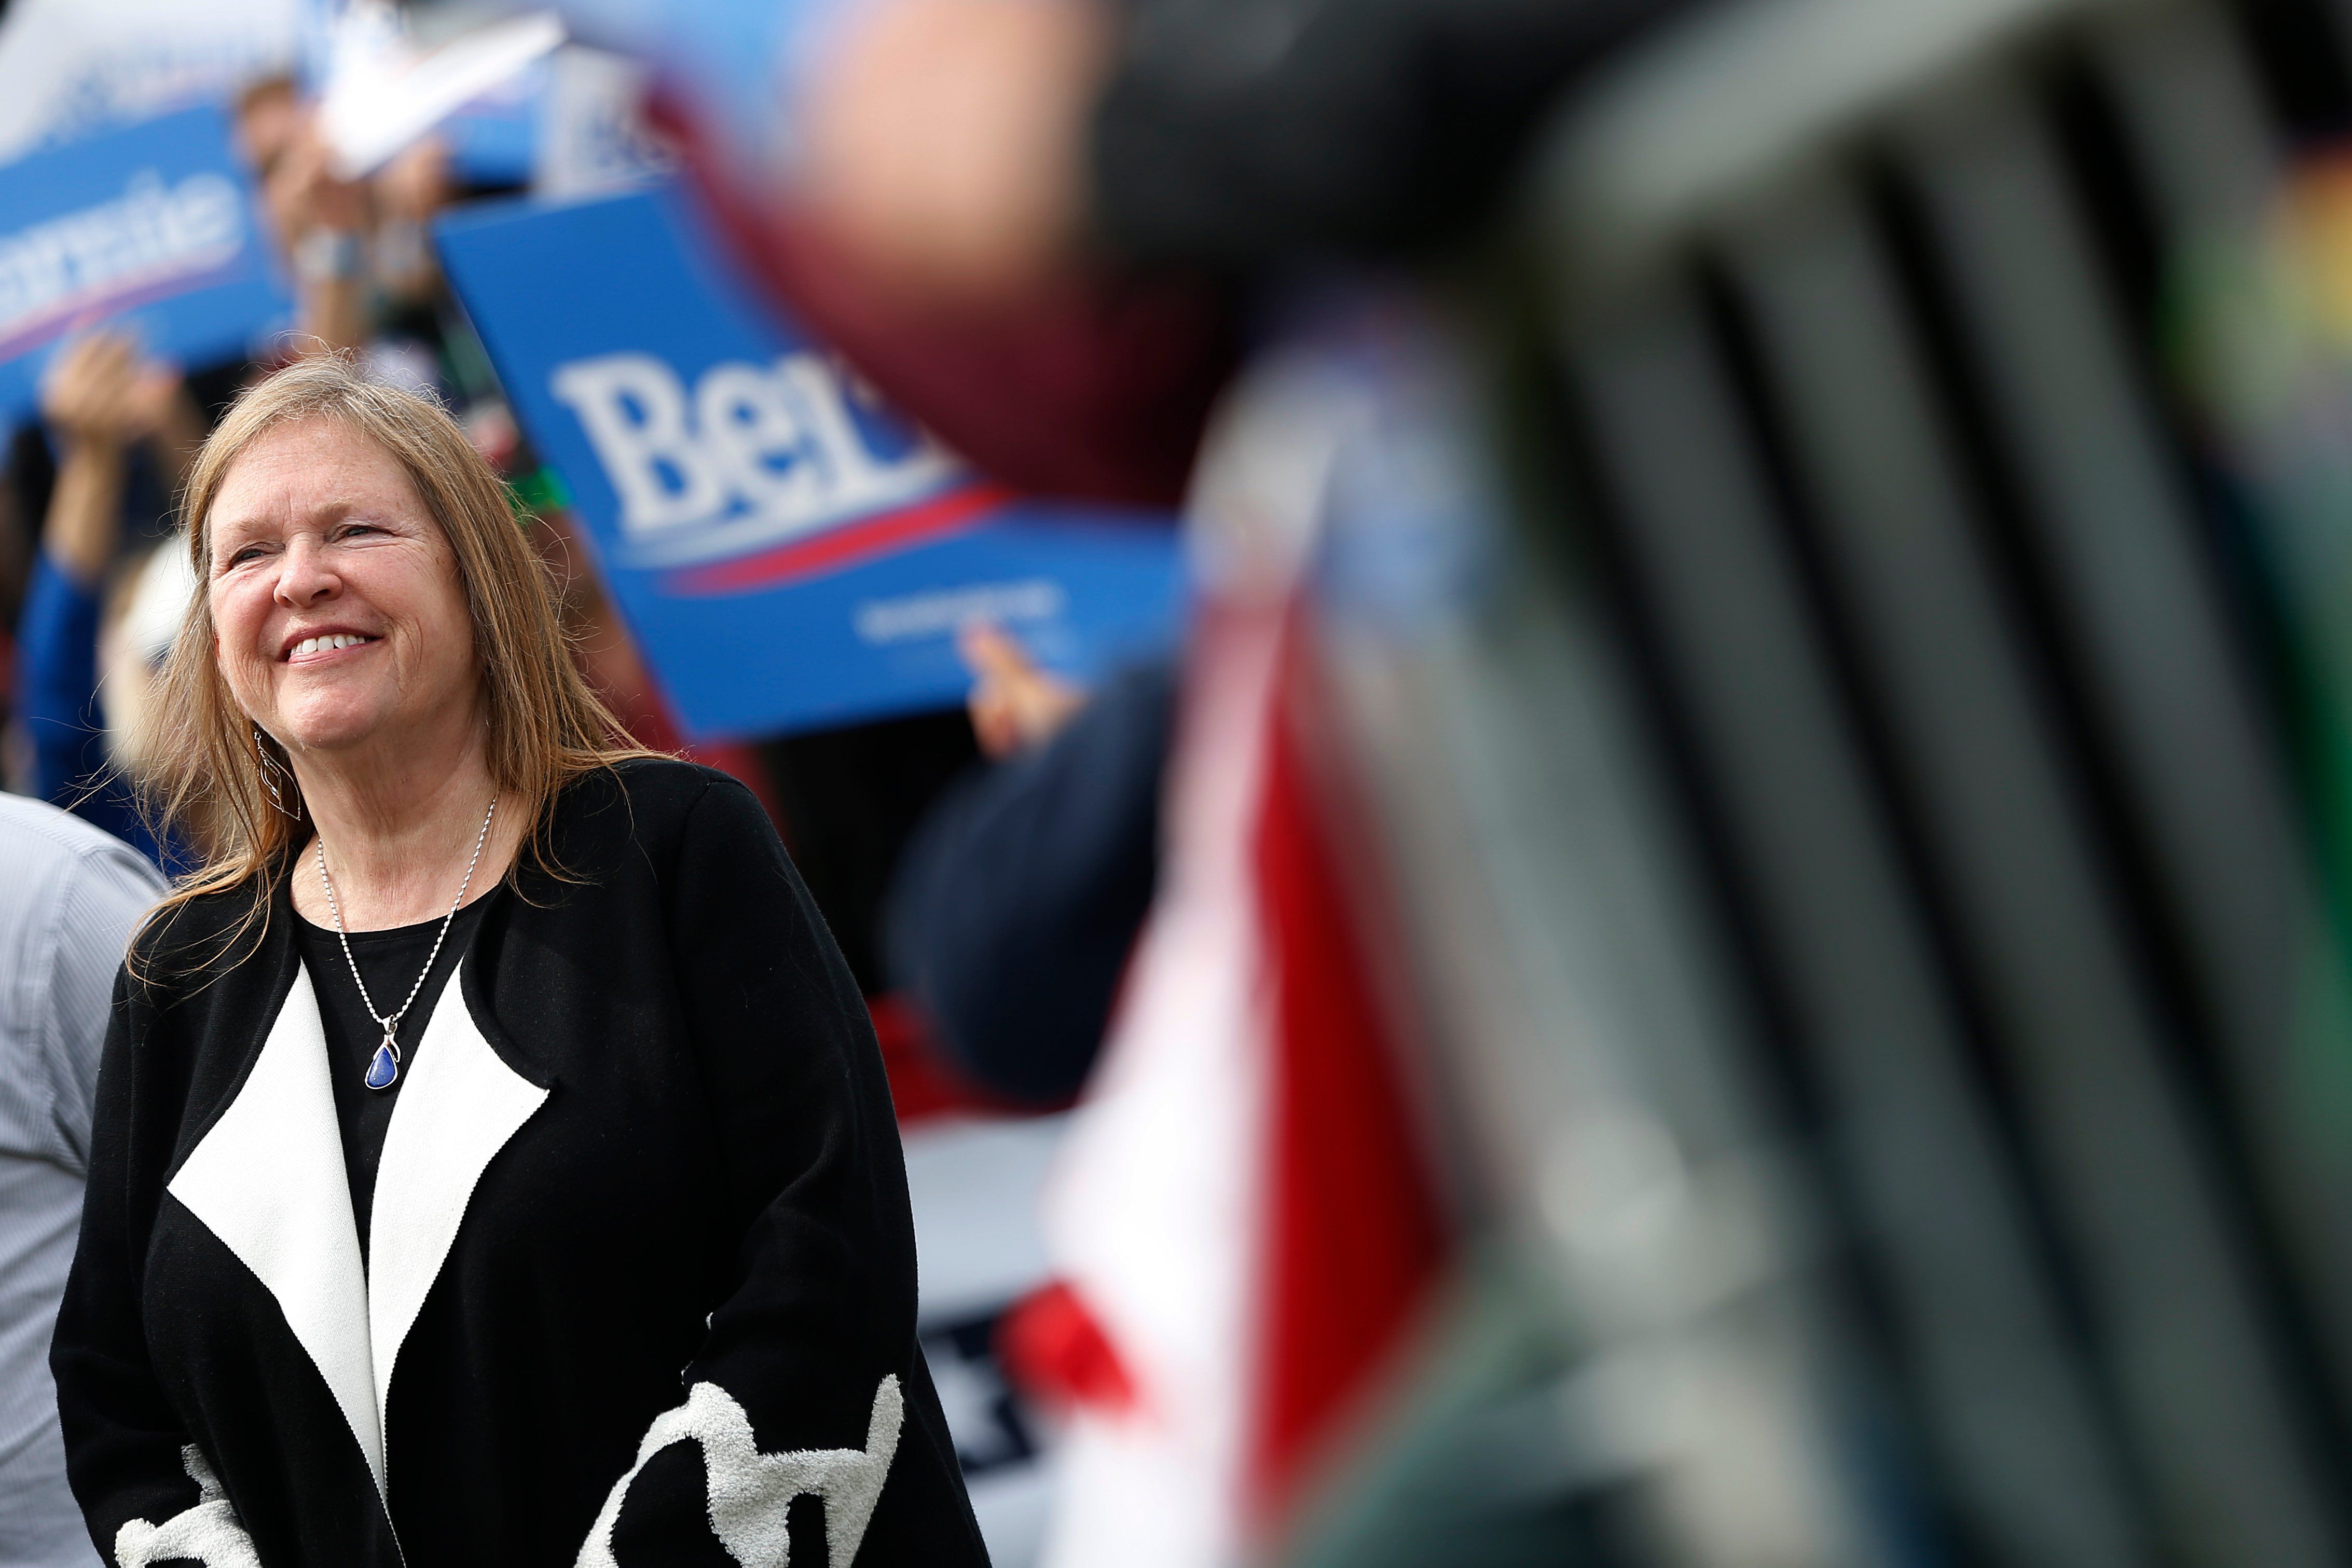 Jane Sanders, wife of 2020 Democratic presidential candidate U.S. Sen. Bernie Sanders smiles as her husband speaks on stage during a campaign rally at Great Meadow Park in Fort Mason on March 24, 2019 in San Francisco, California. (Photo by Stephen Lam/Getty Images)